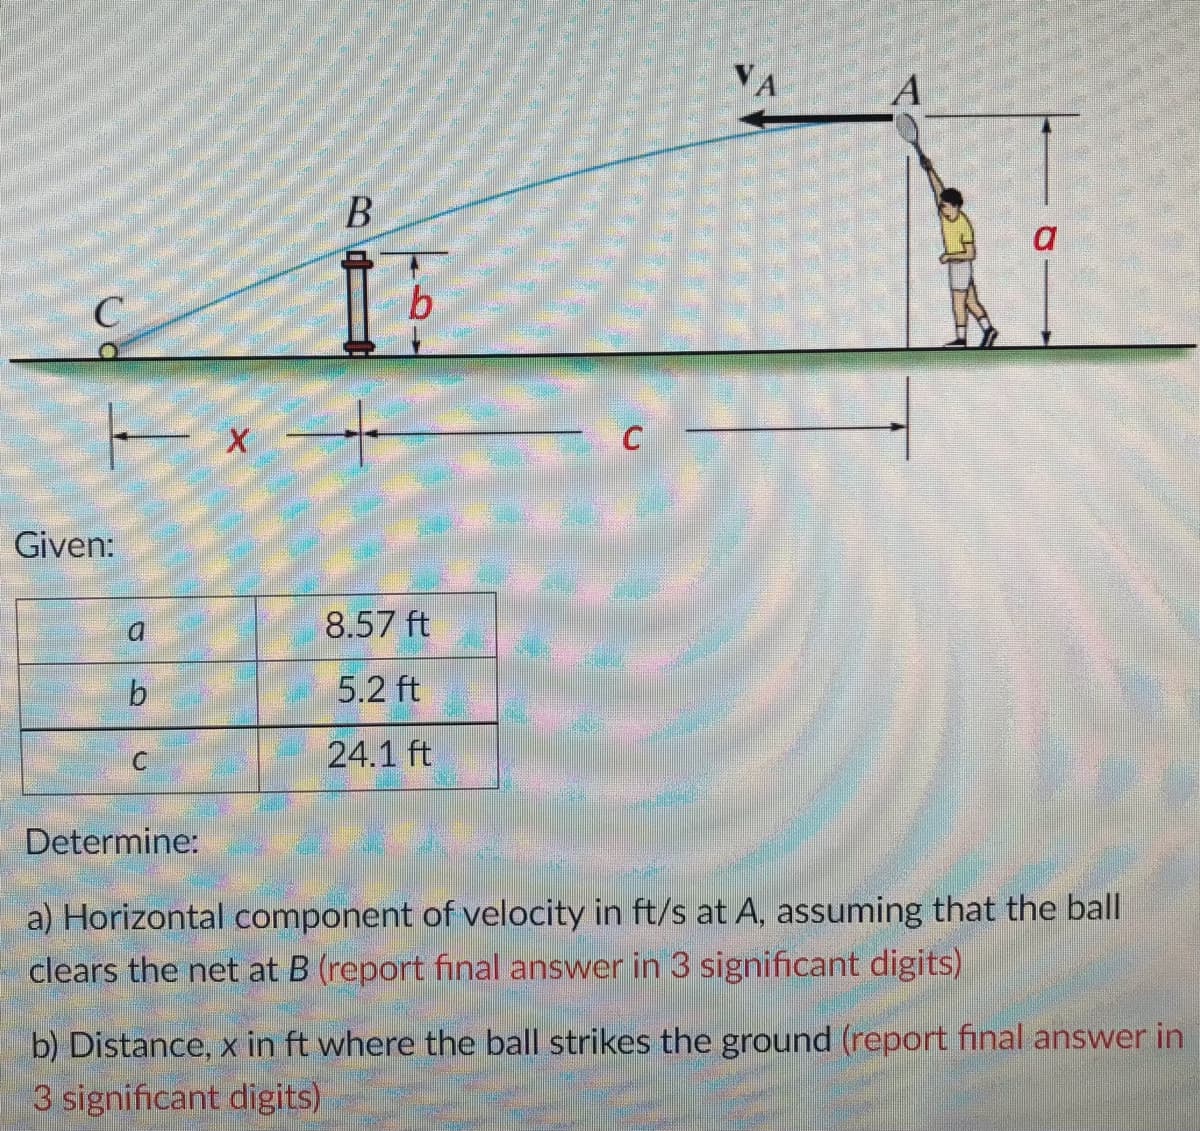 VA
A
B
C
Given:
8.57 ft
b
5.2 ft
24.1 ft
Determine:
a) Horizontal component of velocity in ft/s at A, assuming that the ball
clears the net at B (report final answer in 3 significant digits)
b) Distance, x in ft where the ball strikes the ground (report final answer in
3 significant digits)
